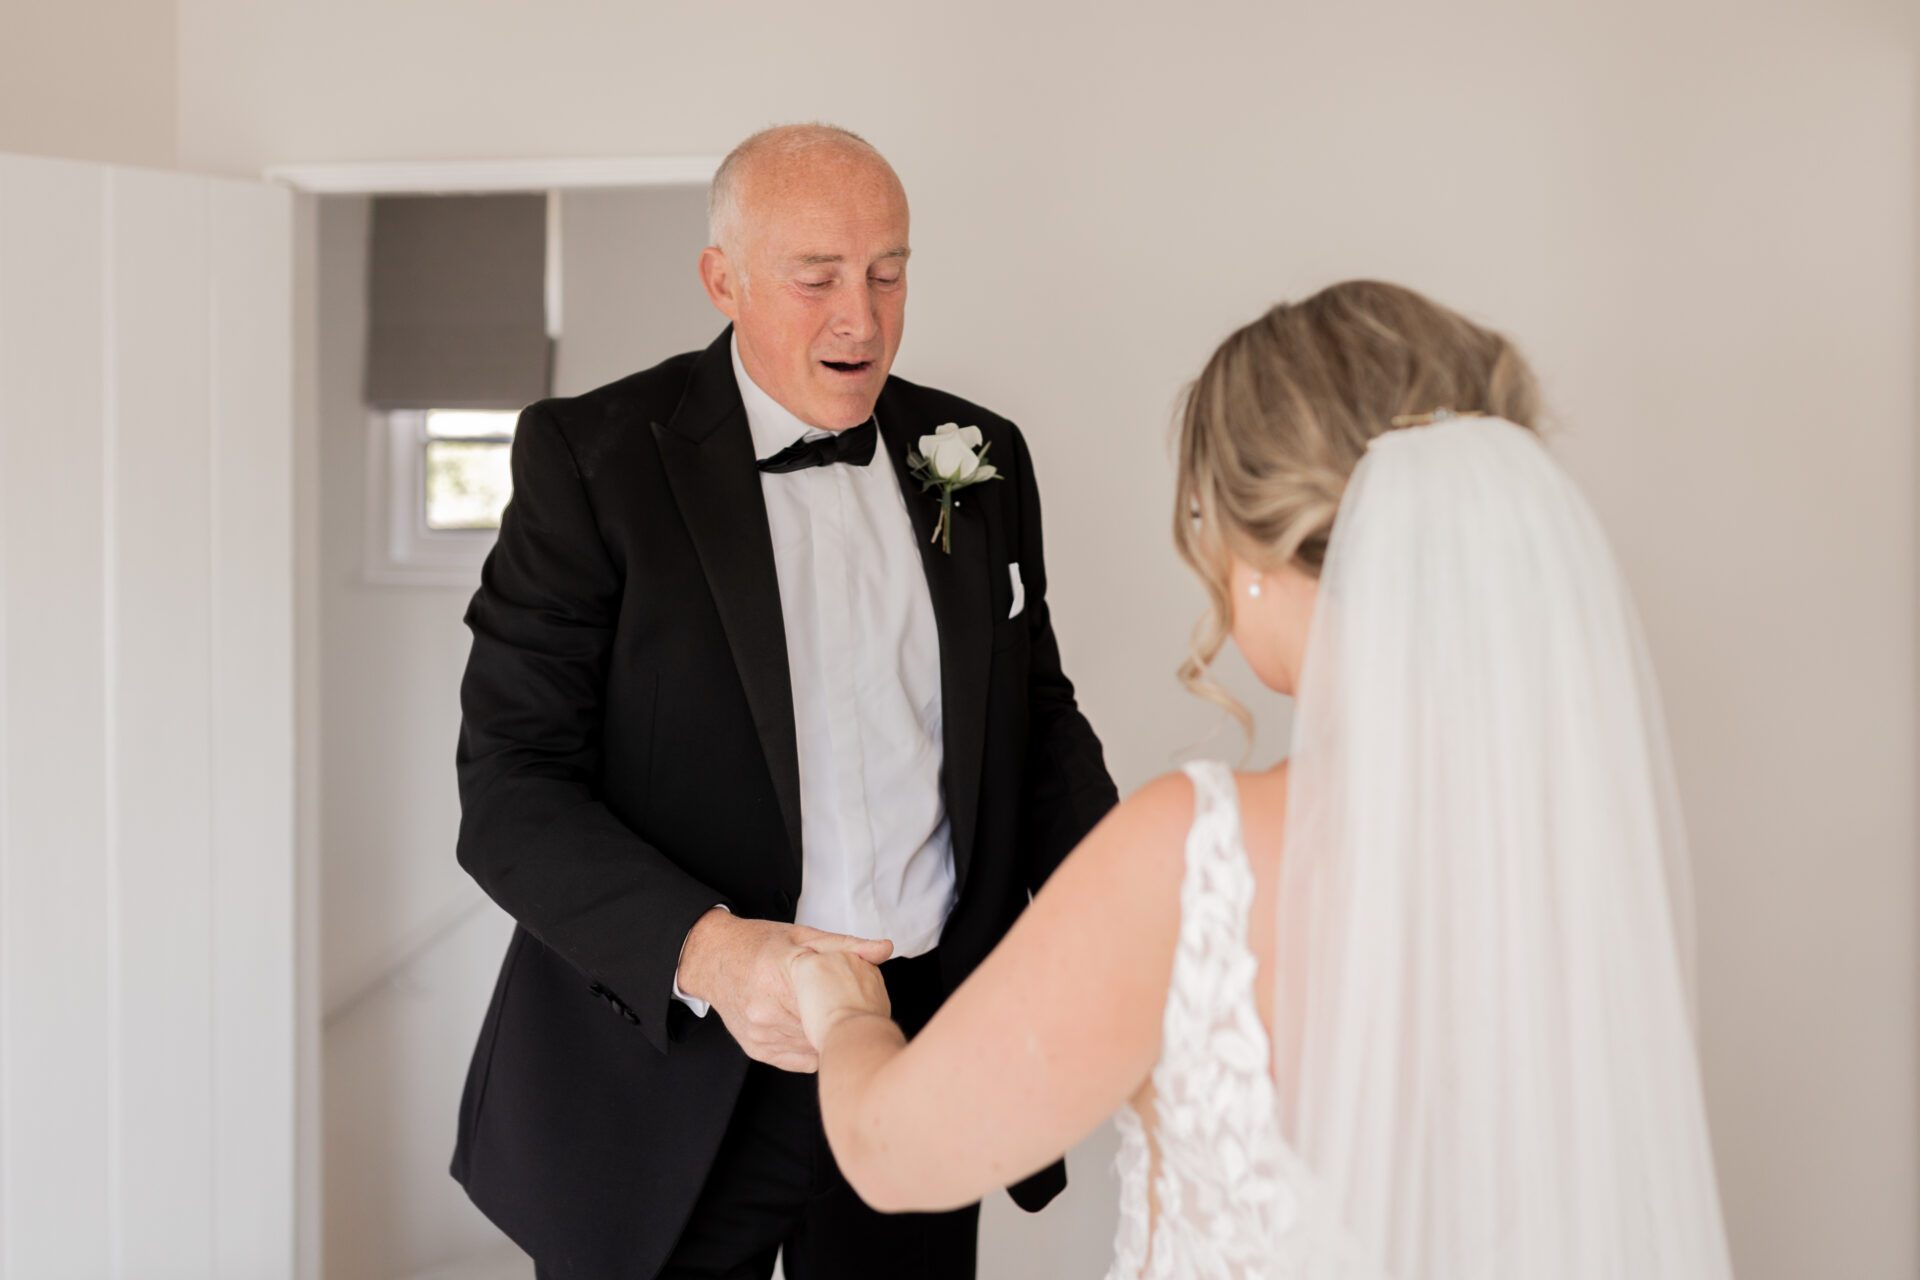 The father of the bride is overcome with emotion as he sees the bride for the first time